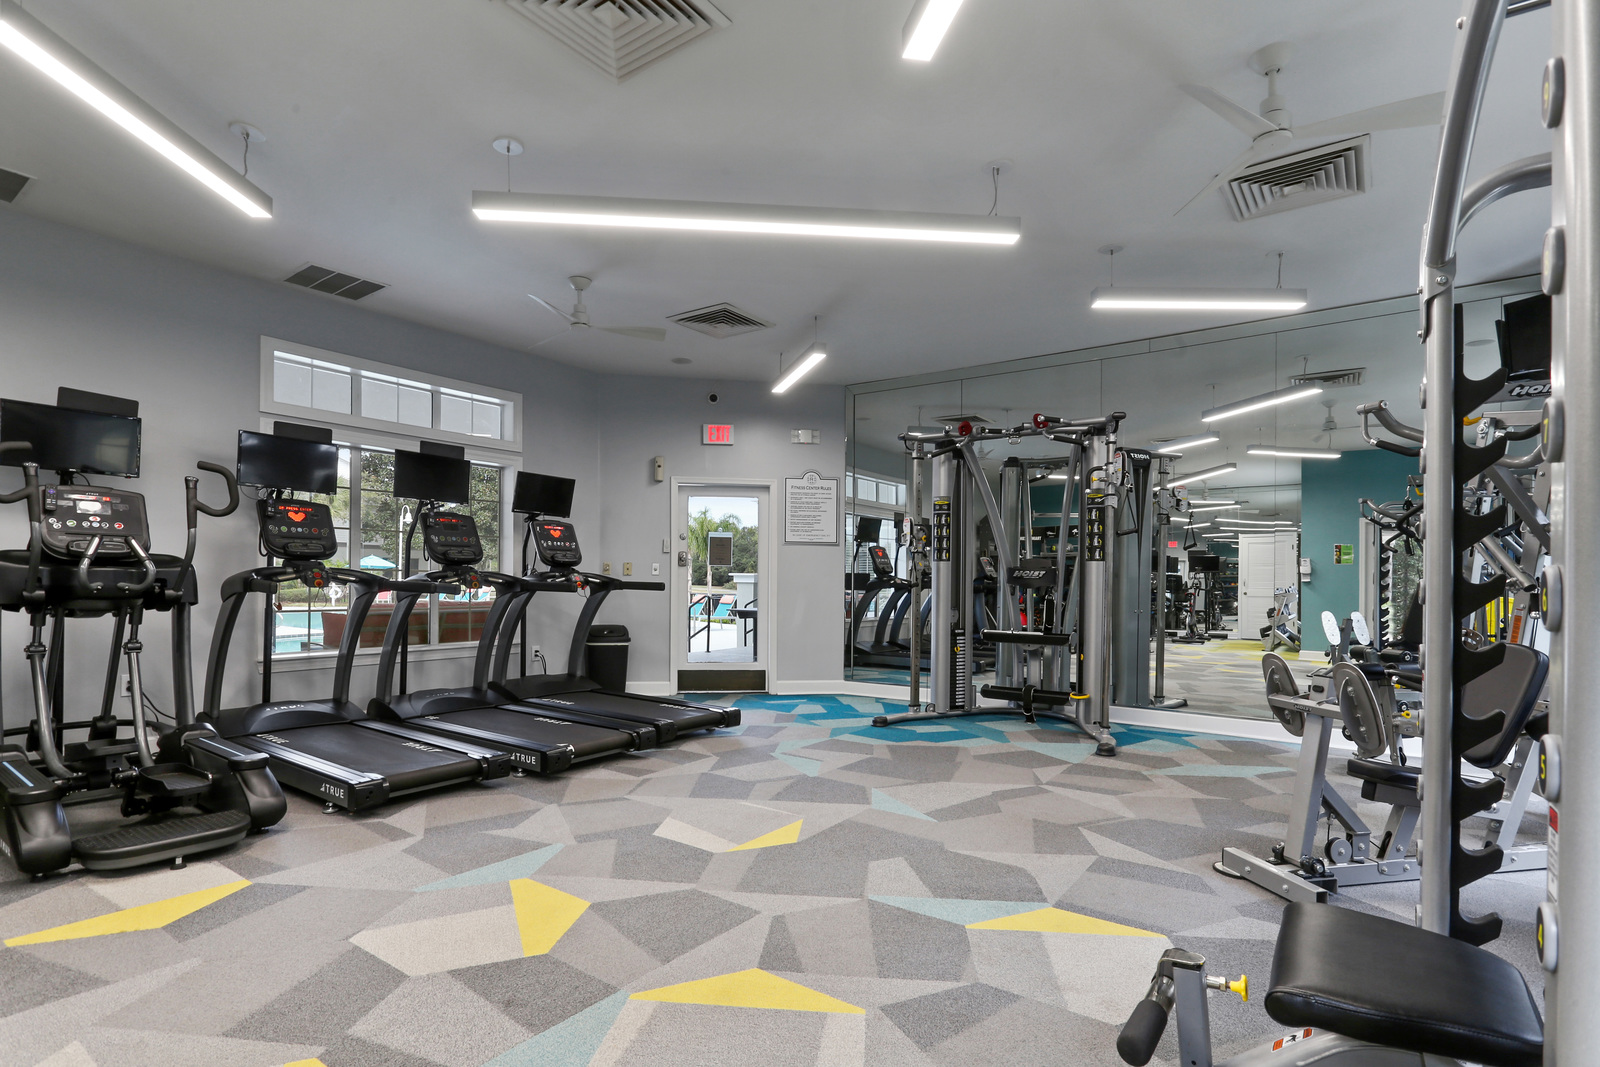 24-HOUR FITNESS CENTER AND HEALTH CLUB